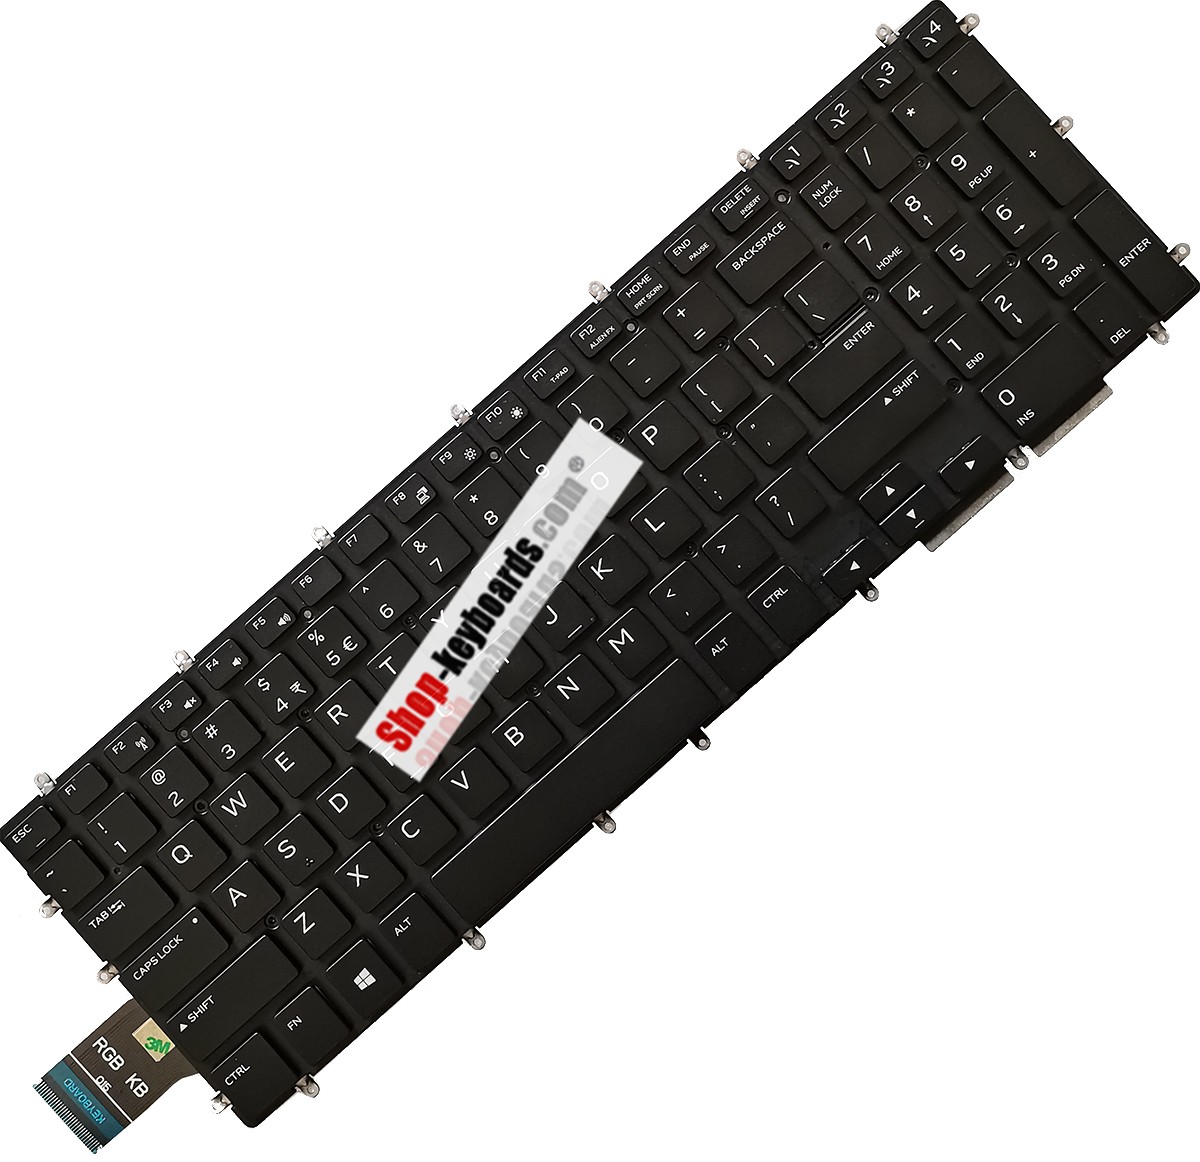 Dell O6F8R5  Keyboard replacement